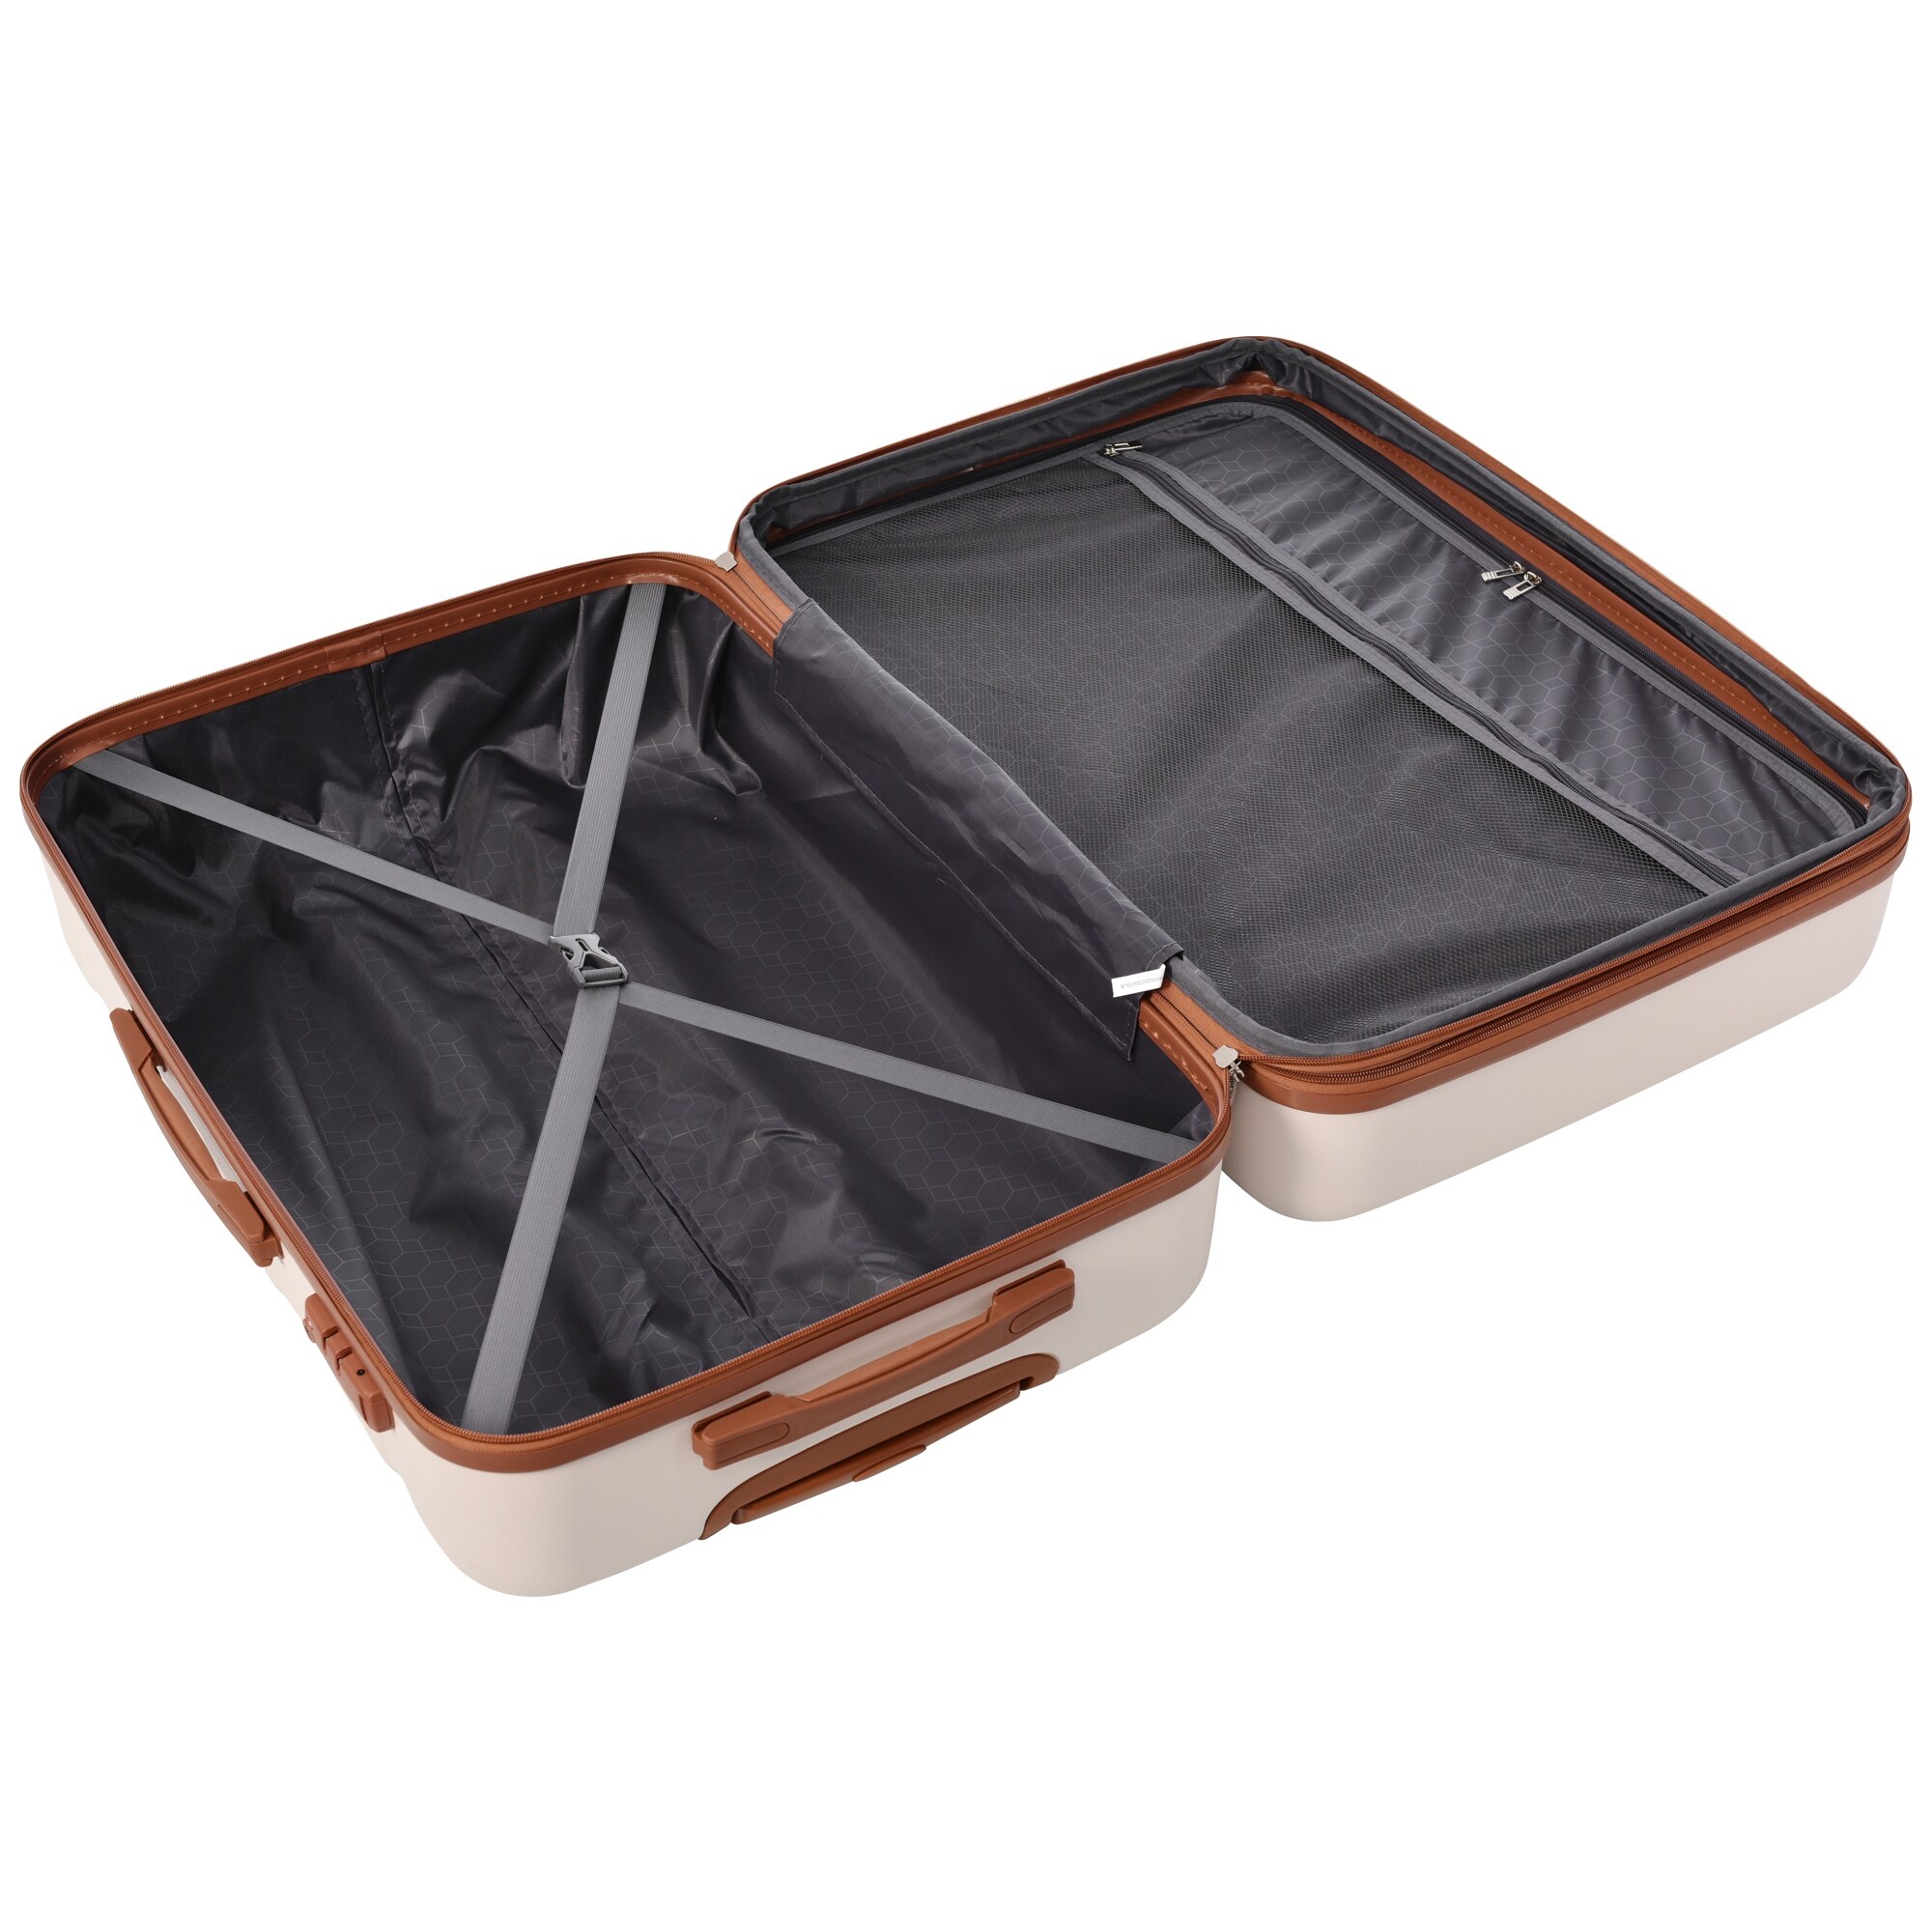 Hard Case Luggage Sets Clearance Expandable 3 Piece Set ABS+PC Material  Spinner Wheel Luggage 18/22/26 - Bed Bath & Beyond - 38396368